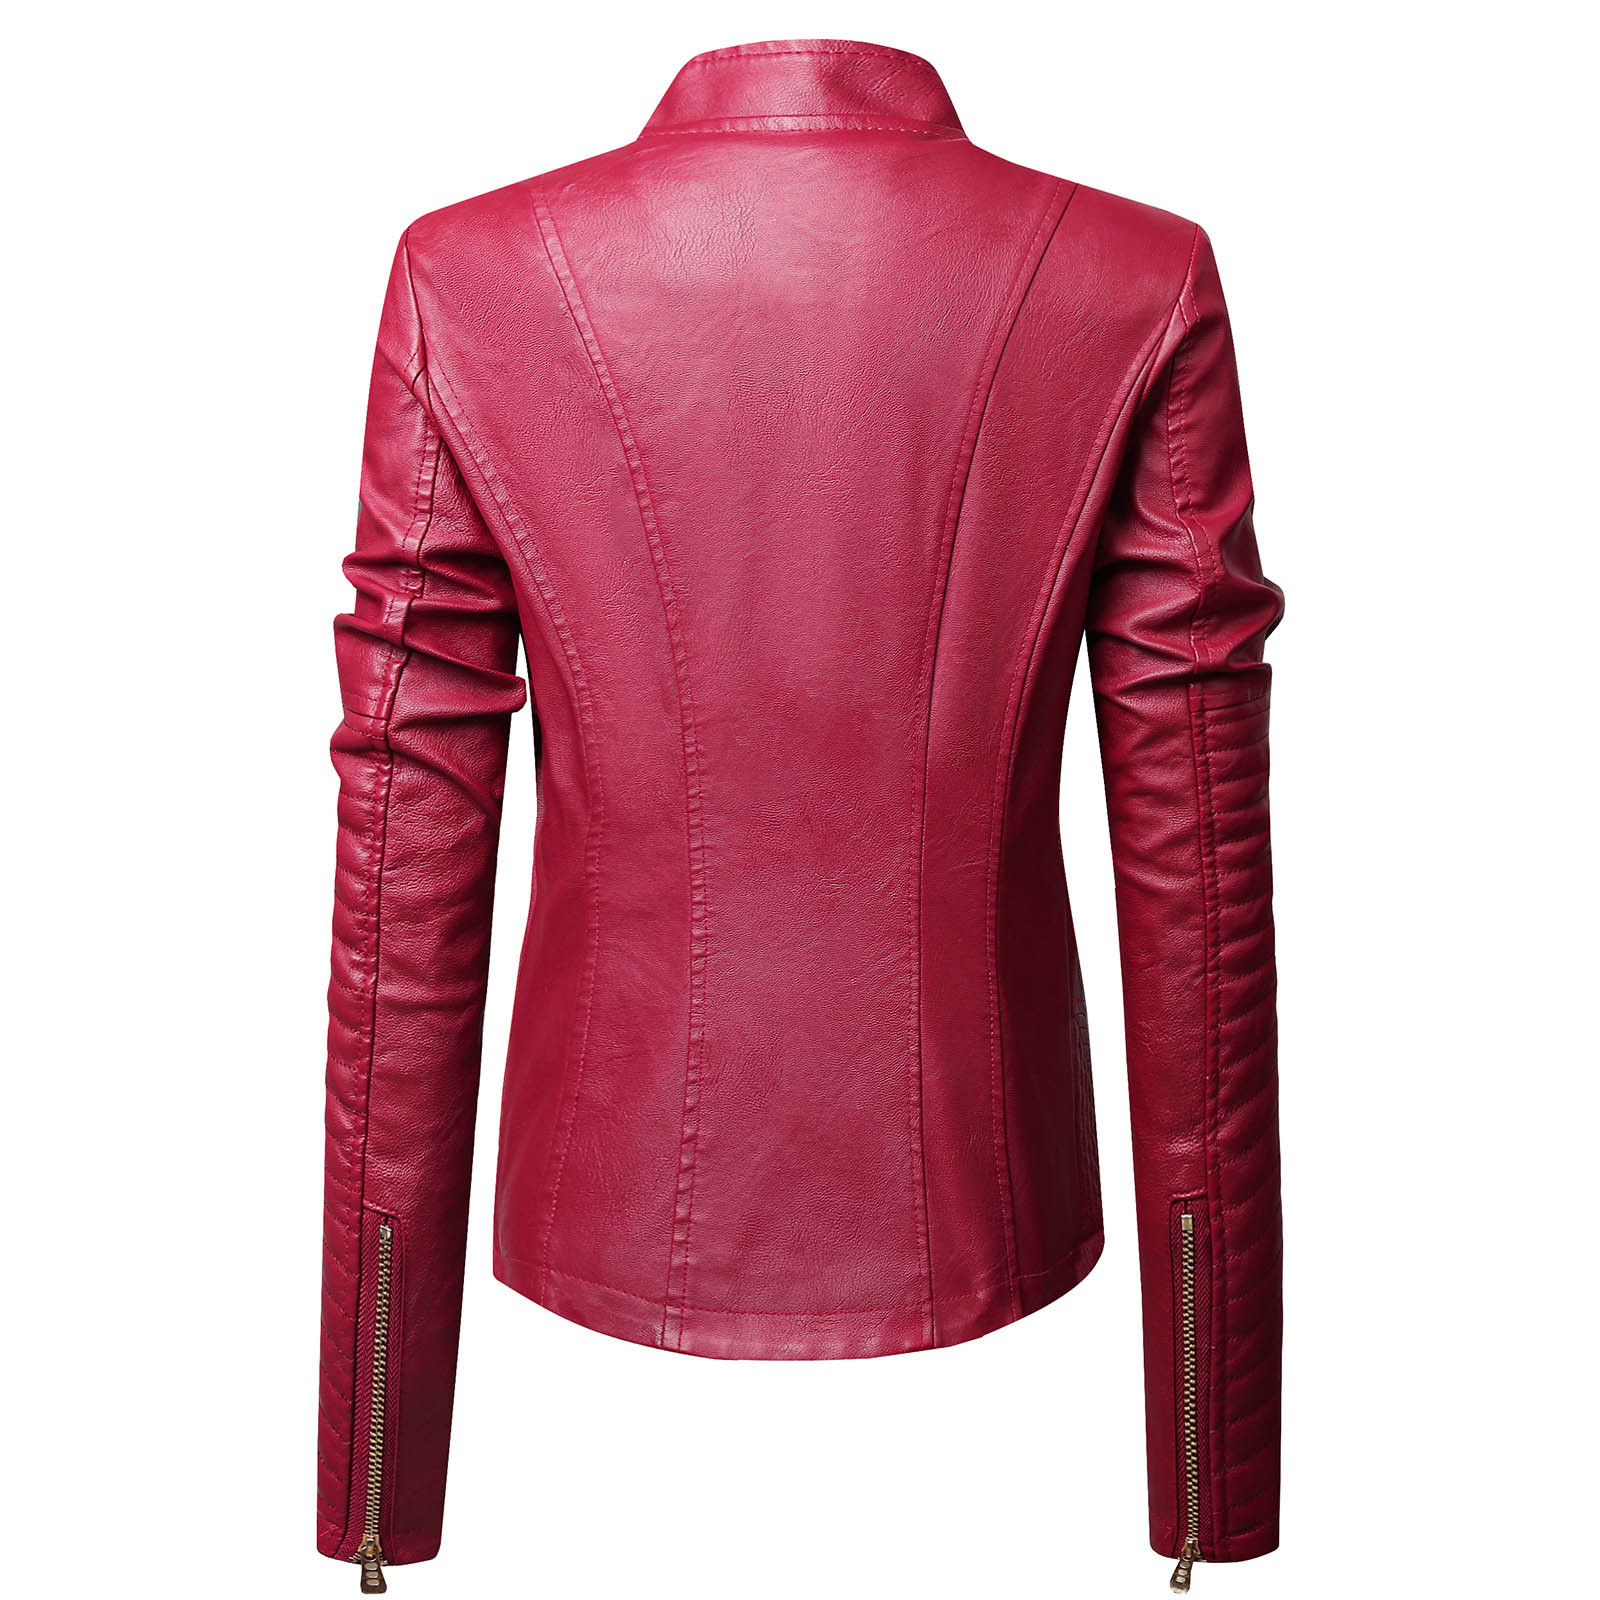 Fanxing Clearance Deals Bomber Leather Jacket Women Fitted Fashion Winter Coats Long Sleeve Full Zip Outwear Stand Collar Motorcycle Jackets - image 4 of 6